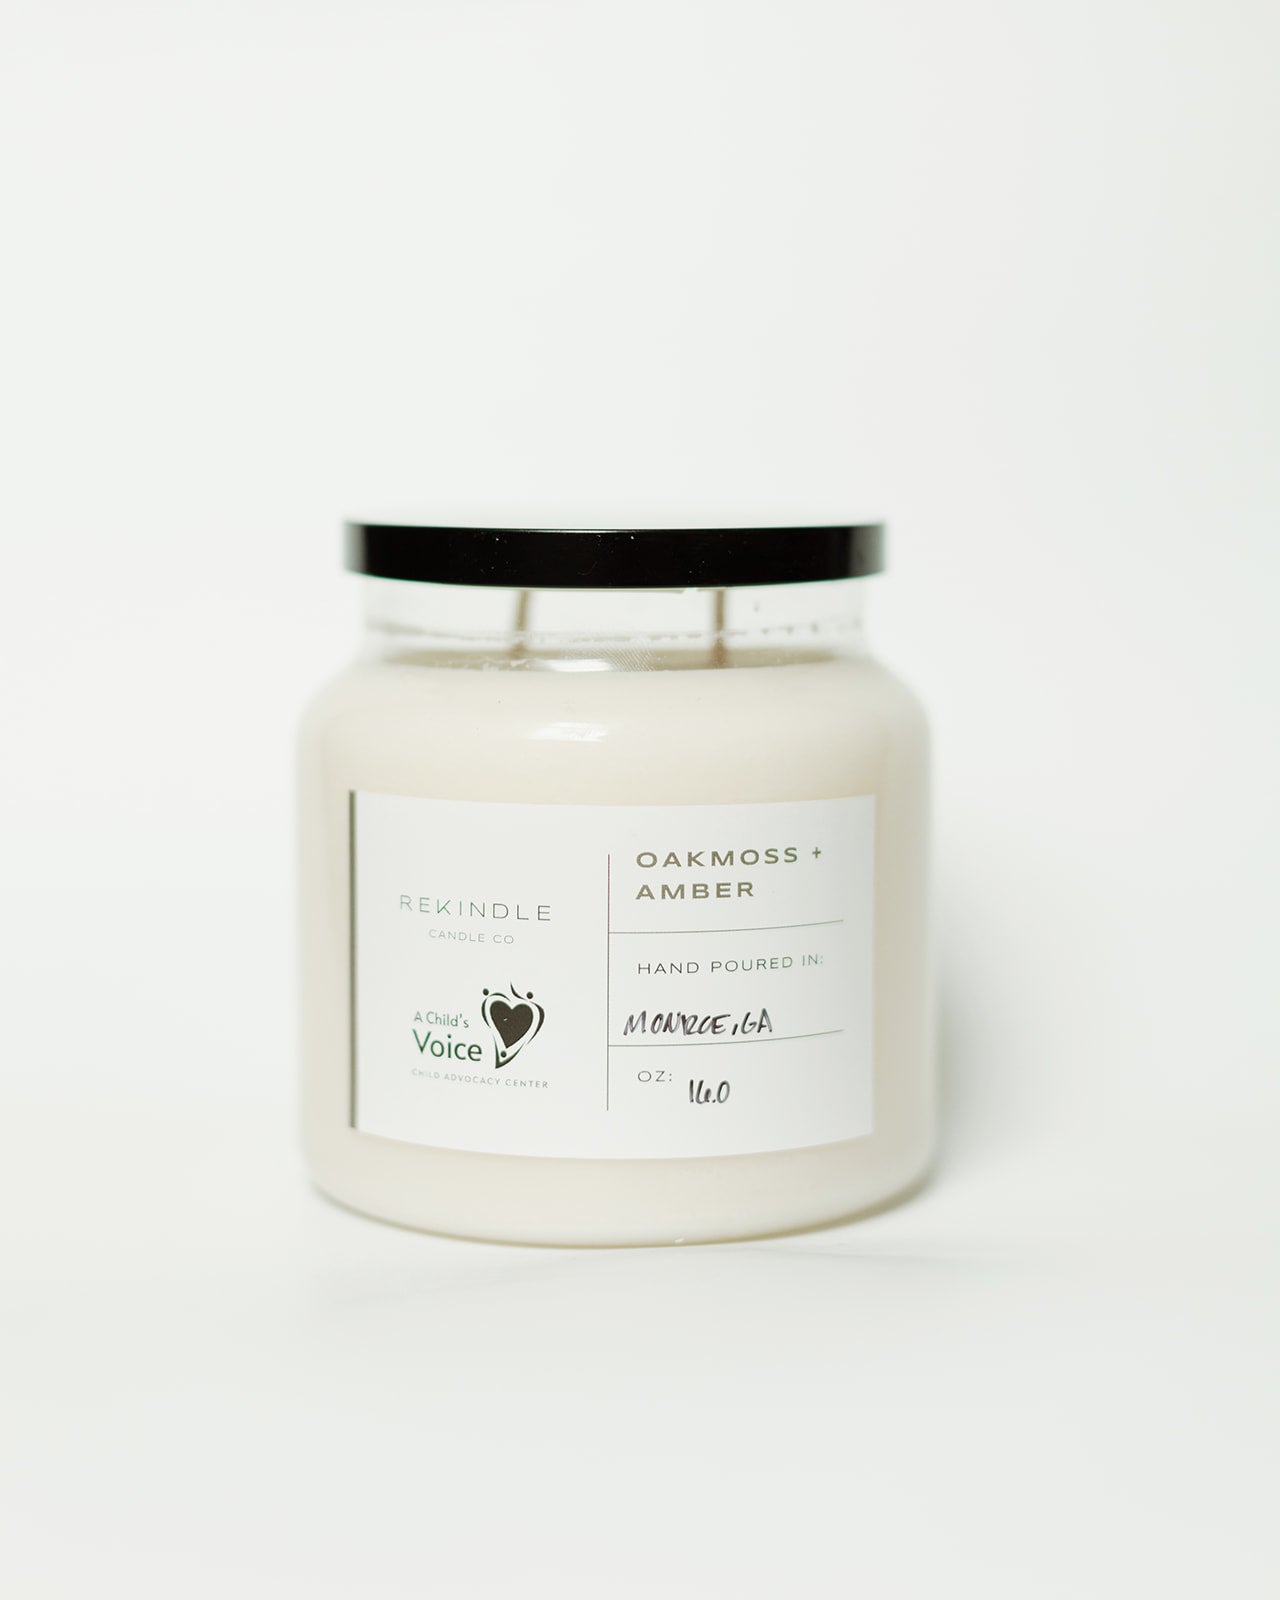 A Child's Voice - Oakmoss + Amber Soy Candle